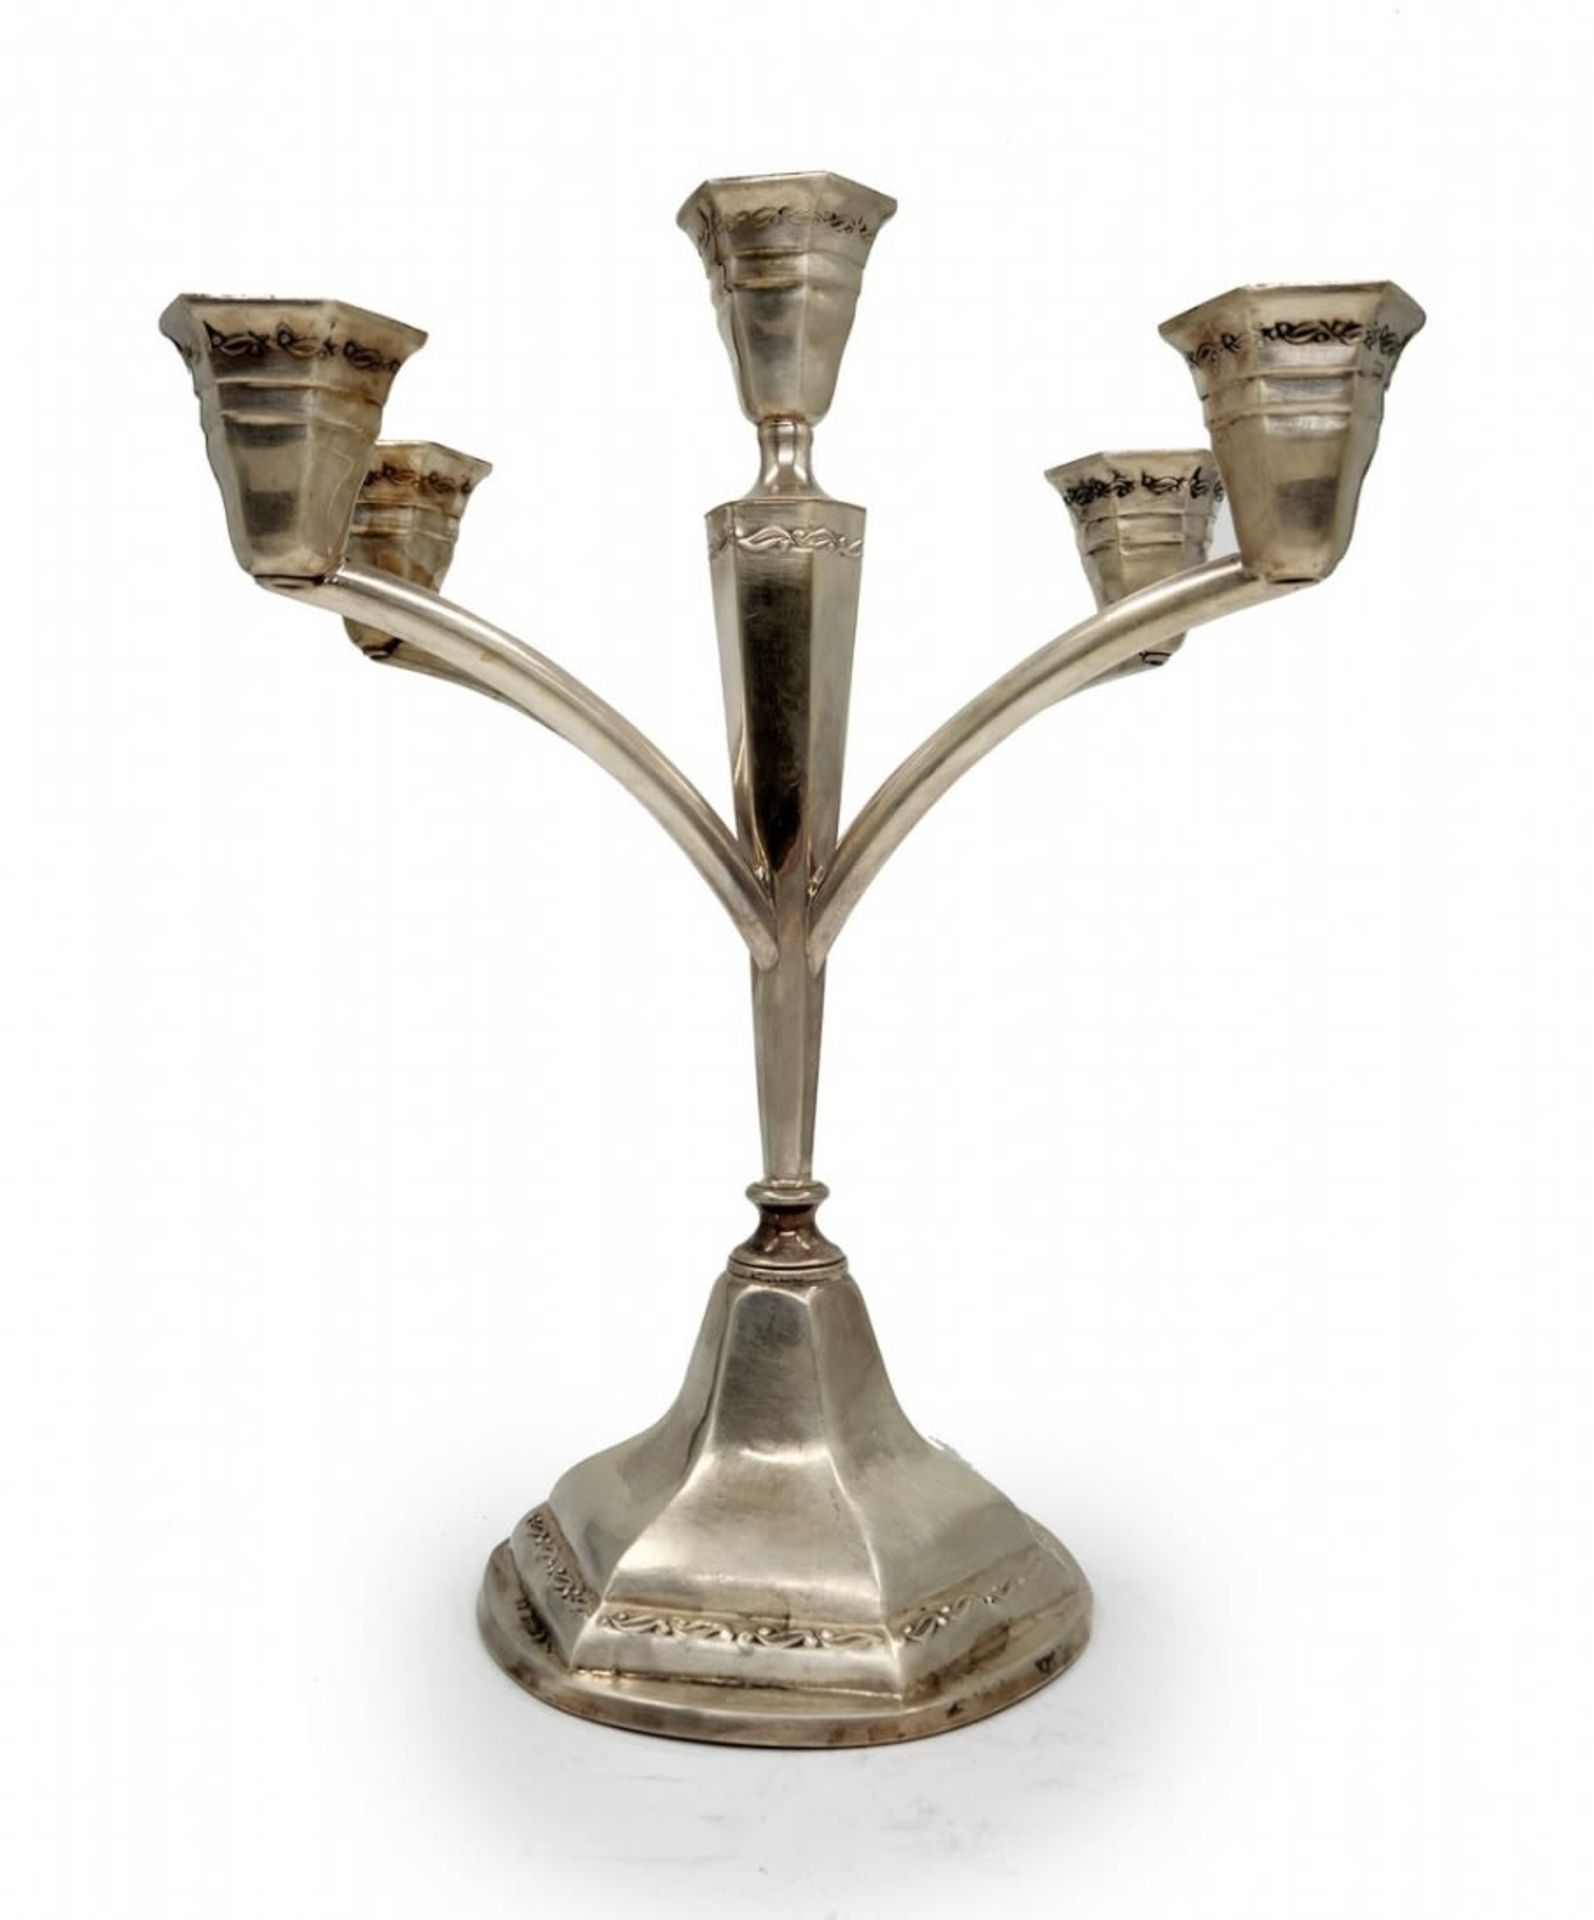 A silver candlestick for five candles, made by the 'Hazorifim' company, made of '800' silver, - Image 4 of 8